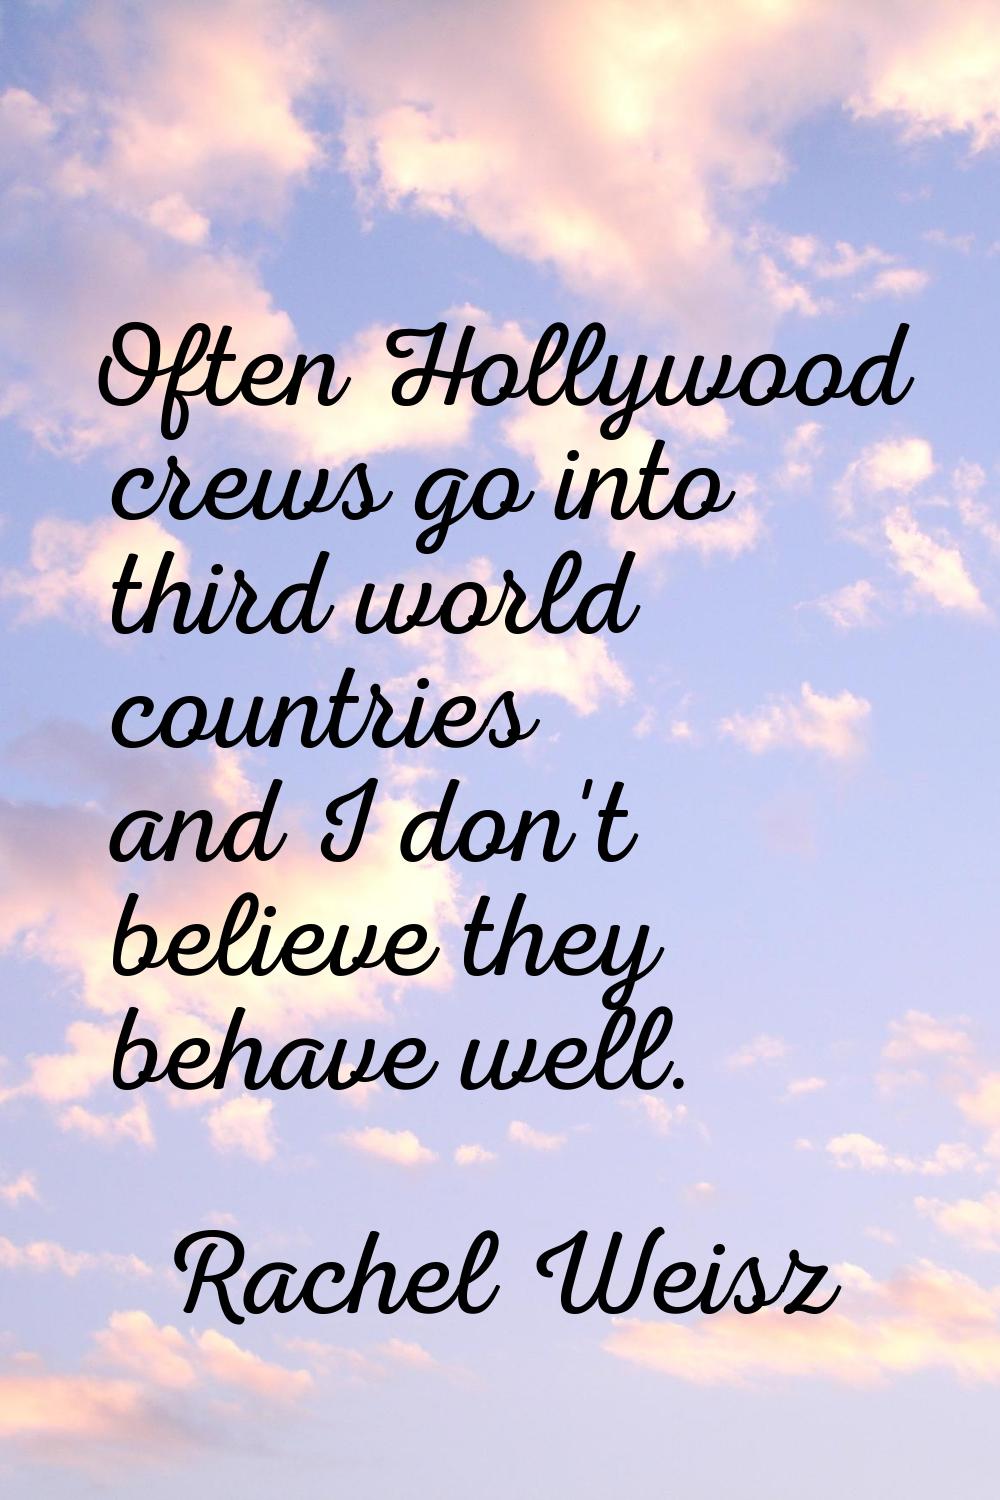 Often Hollywood crews go into third world countries and I don't believe they behave well.